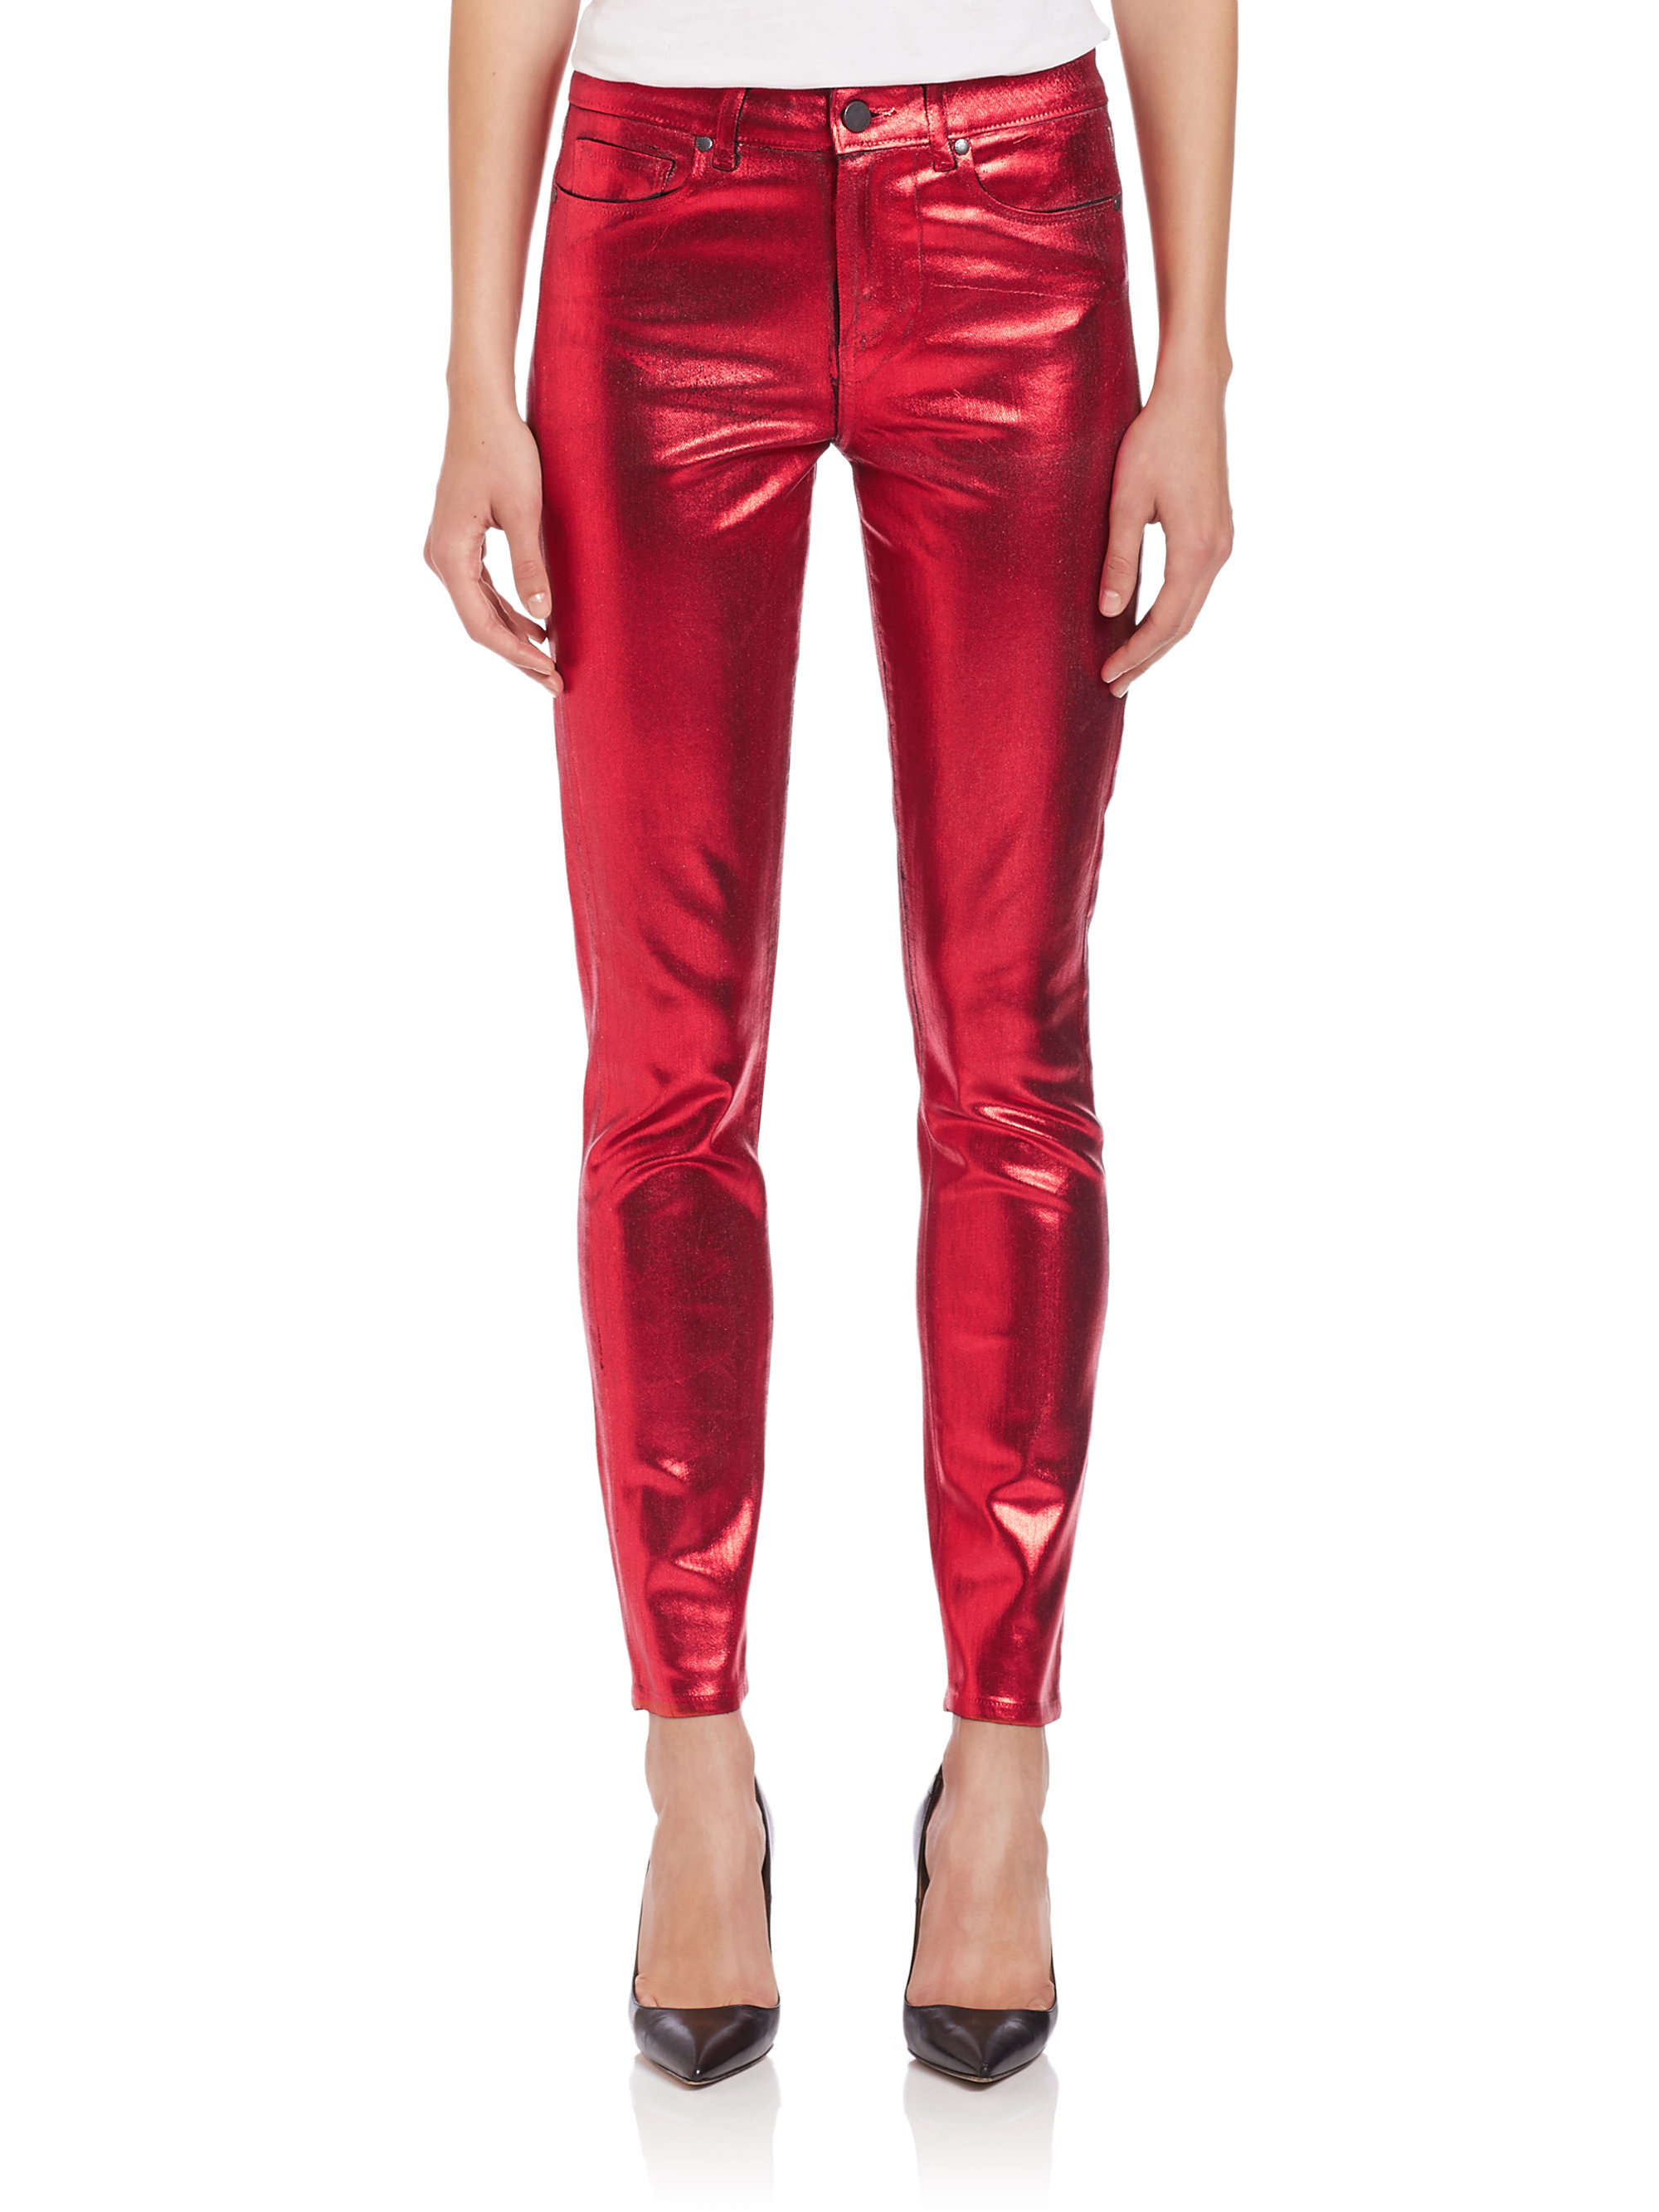 PAIGE Hoxton High-rise Metallic Ultra Skinny Jeans in Red - Lyst